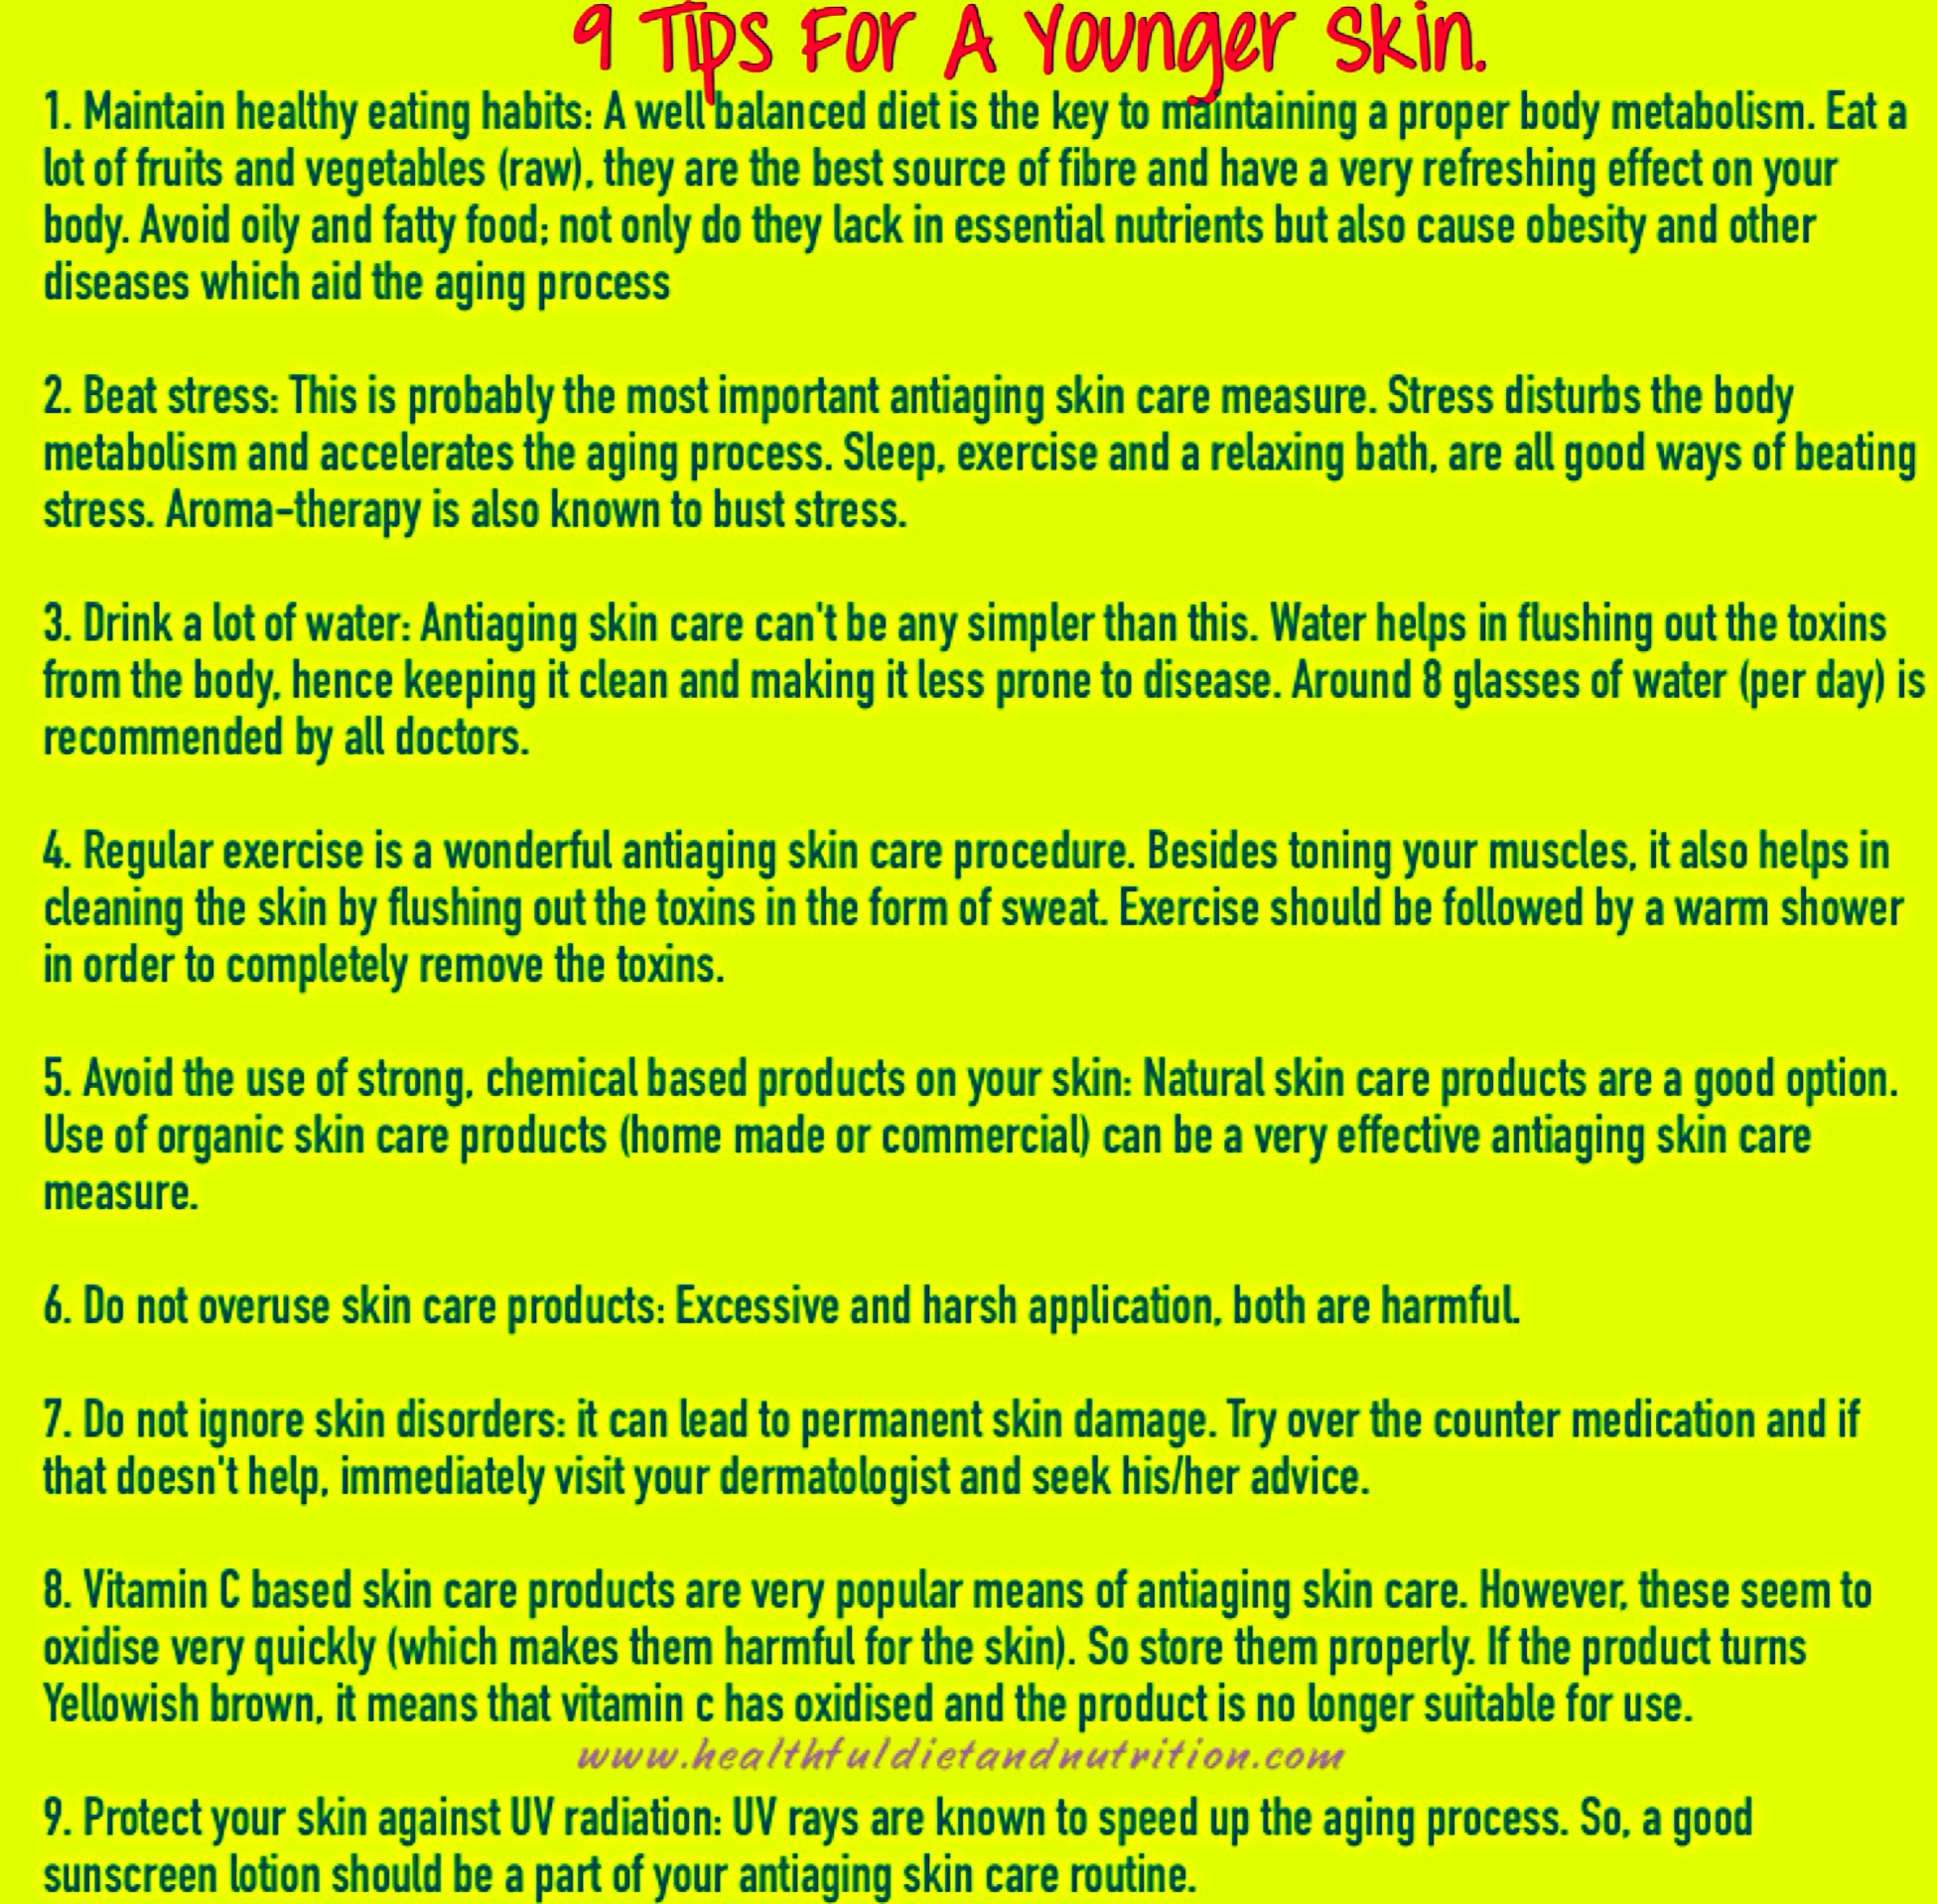 9 Tips For A Younger Skin